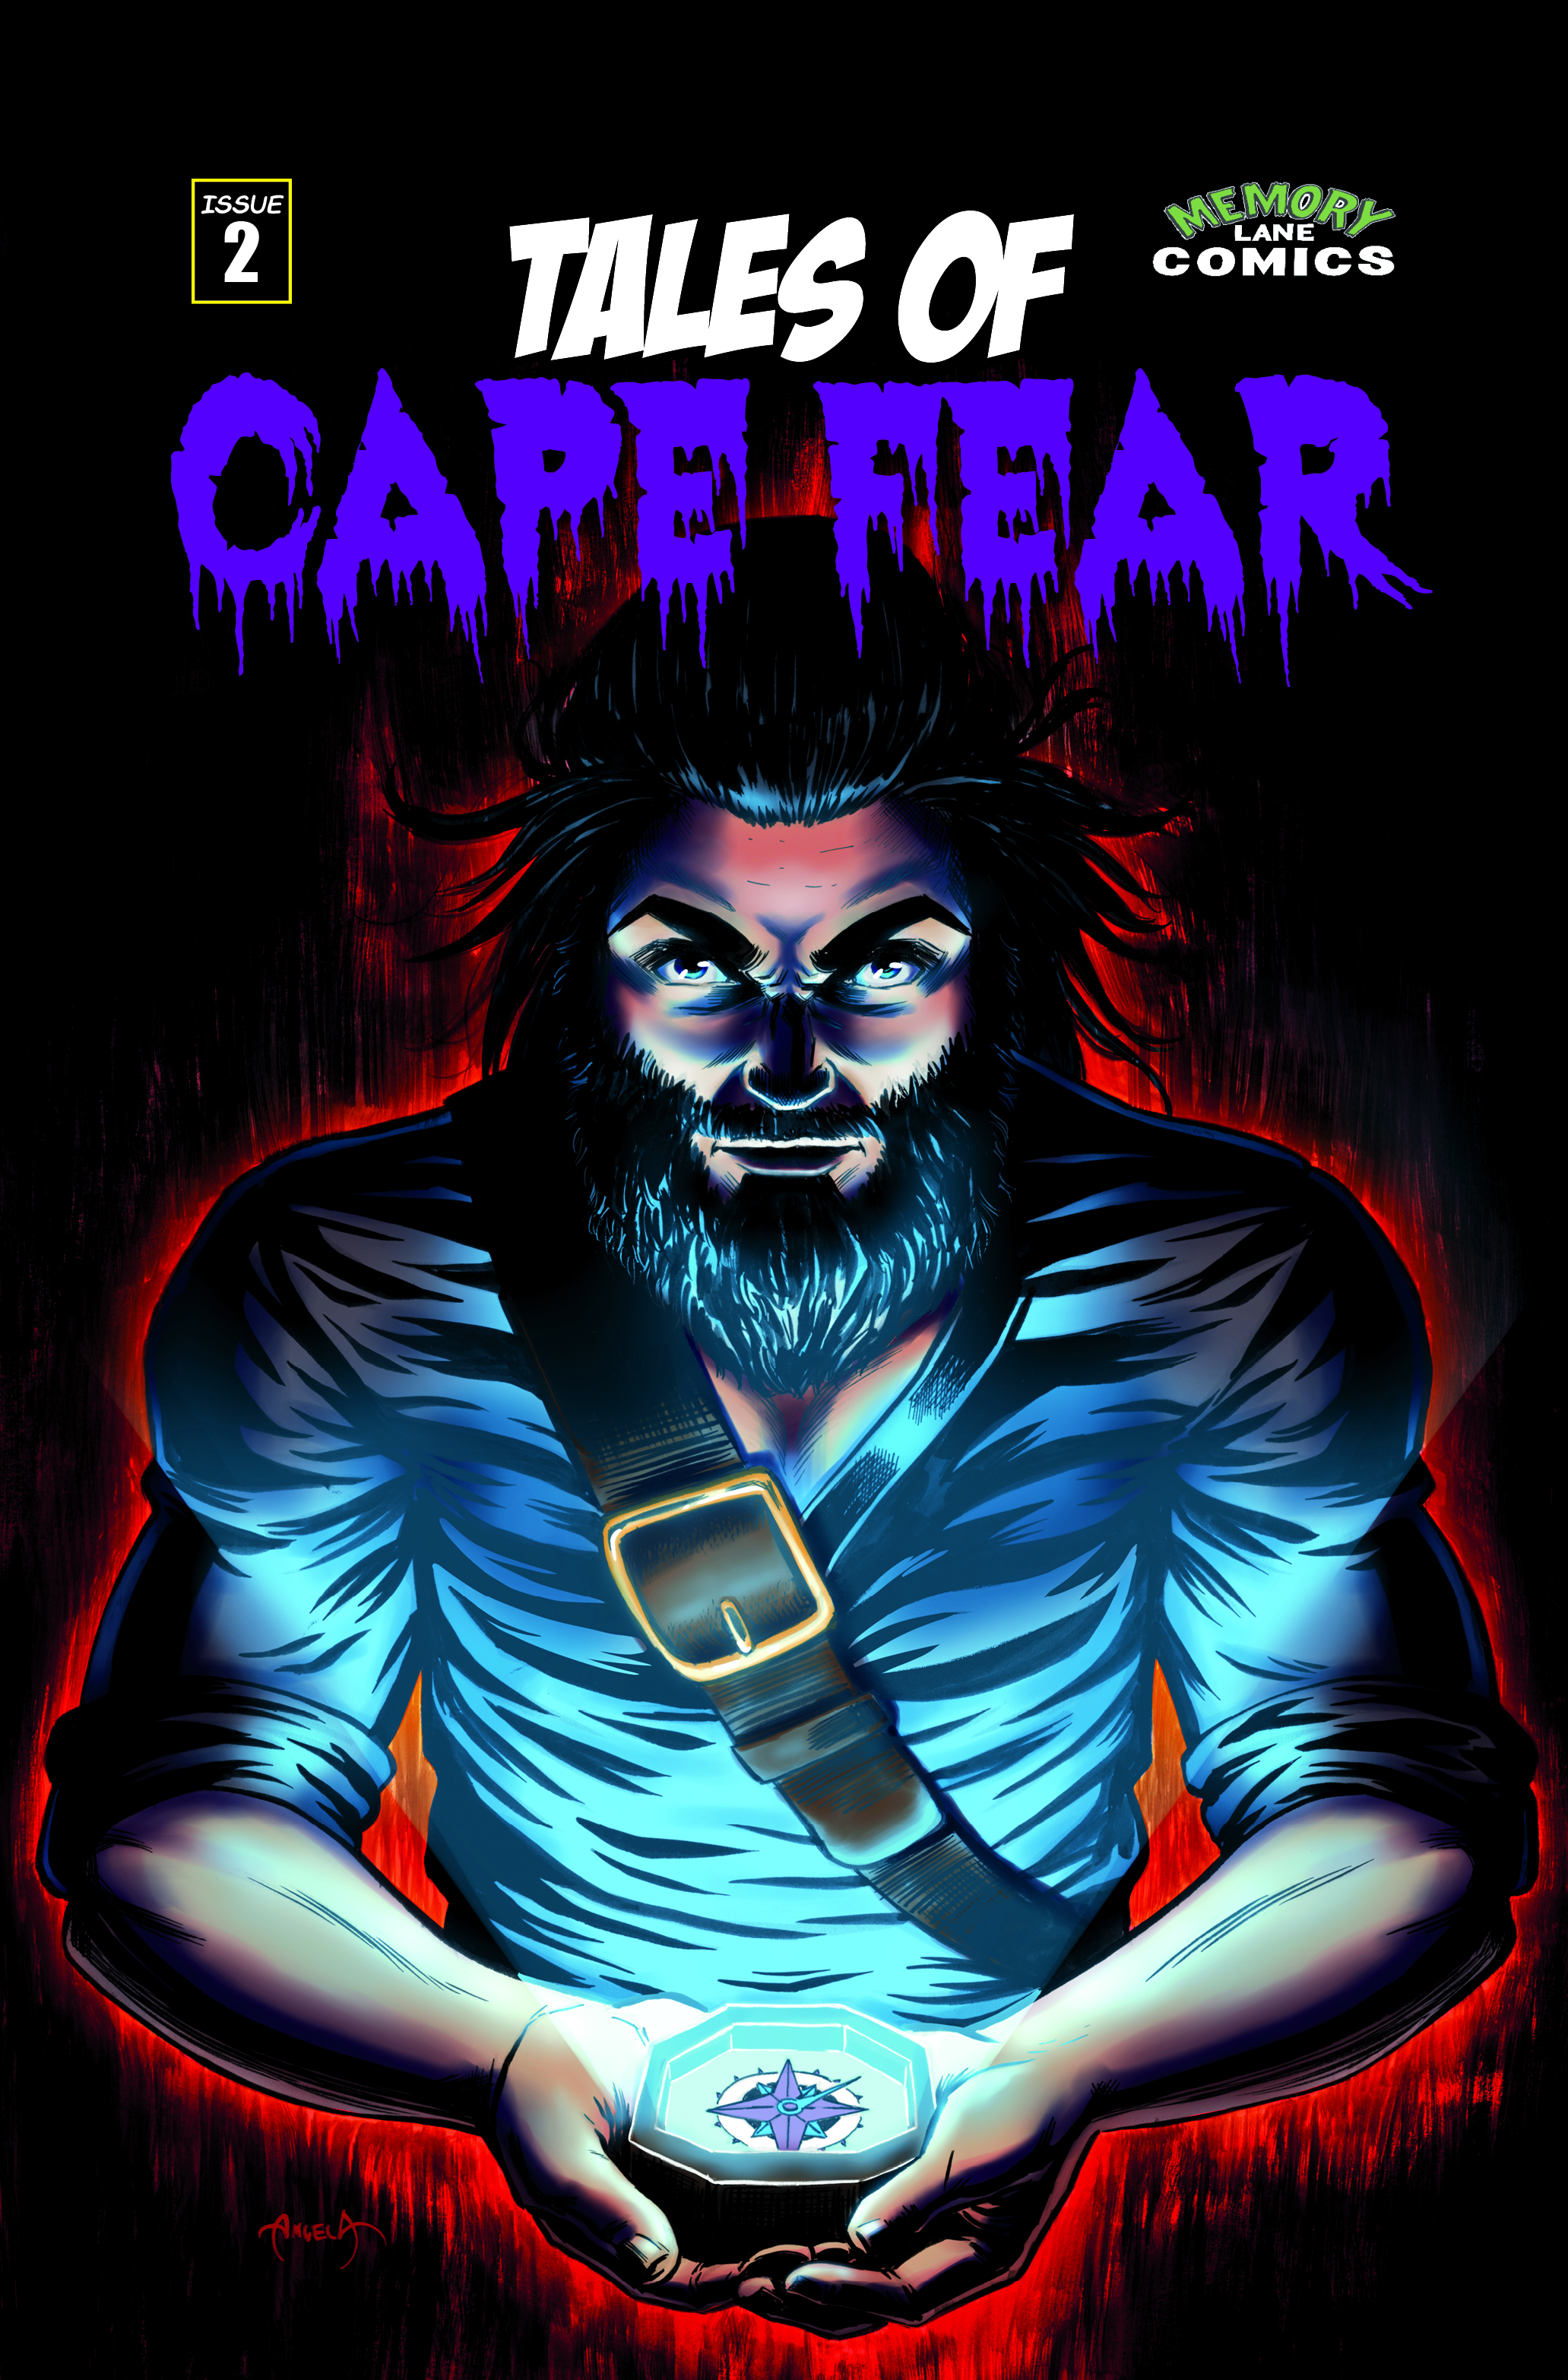 Tales of Cape Fear Issue 2 Cover A